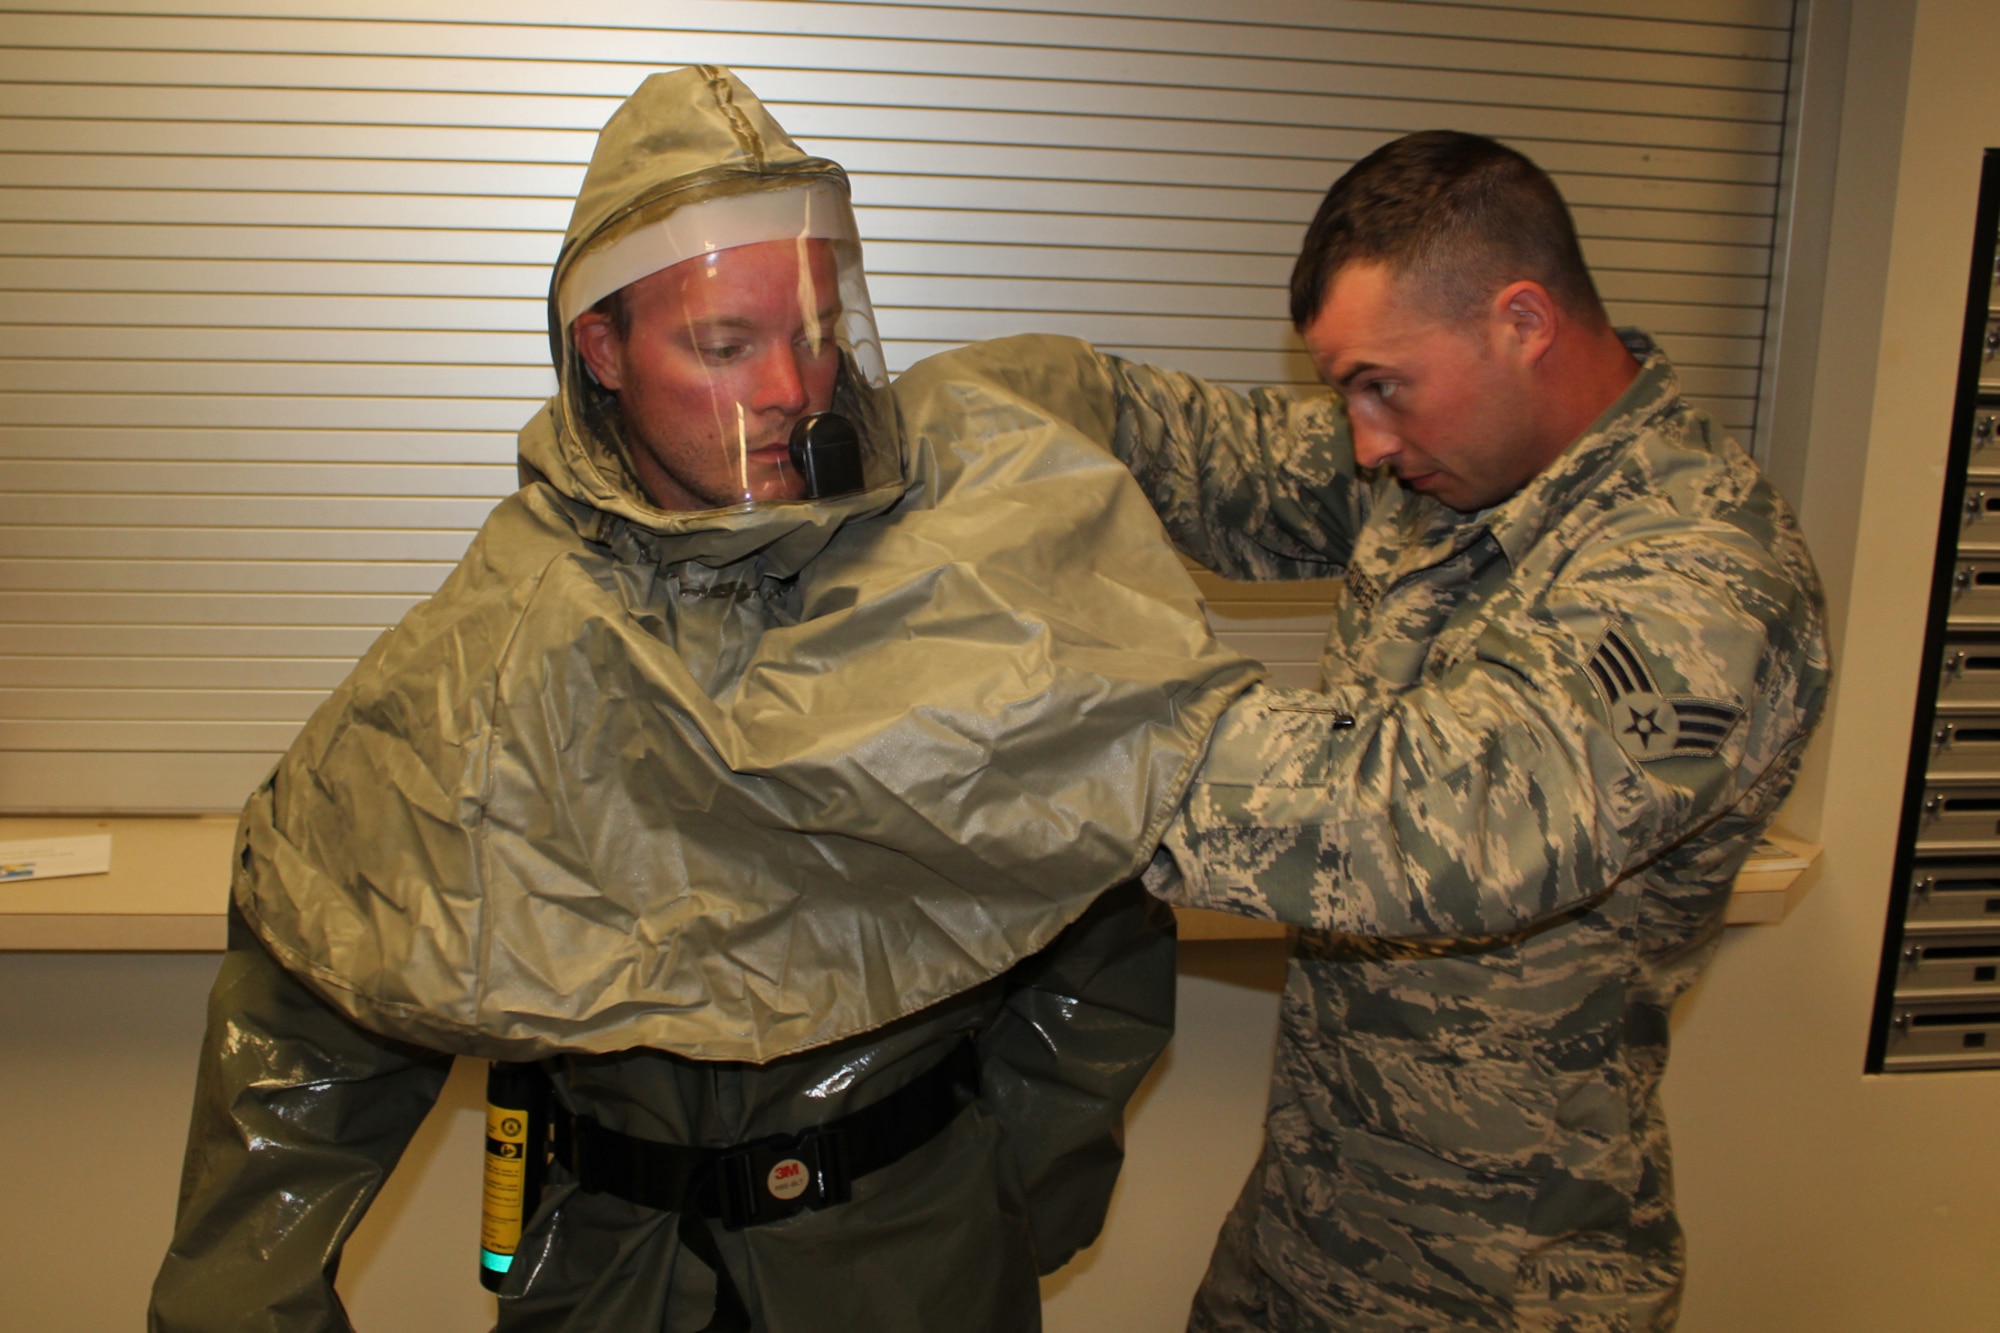 150605-Z-VA676-009 – Senior Airman Louis Boggs assists Staff Sgt. Justin Sawgle as he dons a protective suit that would allow him to work in a hazardous environment. Boggs is a member of the 191st Aircraft Maintenance Squadron and Sawgle is a member of the 127th Logistics Readiness Squadron. Both Airmen are augmentees to the 127th Medical Group for response to a hazardous material situation. During a June 5, 2015, training exercise at Selfridge Air National Guard Base, Mich., the Airmen reviewed the use of the protective suits and related equipment. Airmen at Selfridge conduct a variety of training exercises every year to be able to respond to local emergencies and/or to deploy to forward locations. (U.S. Air National Guard photo by Tech. Sgt. Dan Heaton)